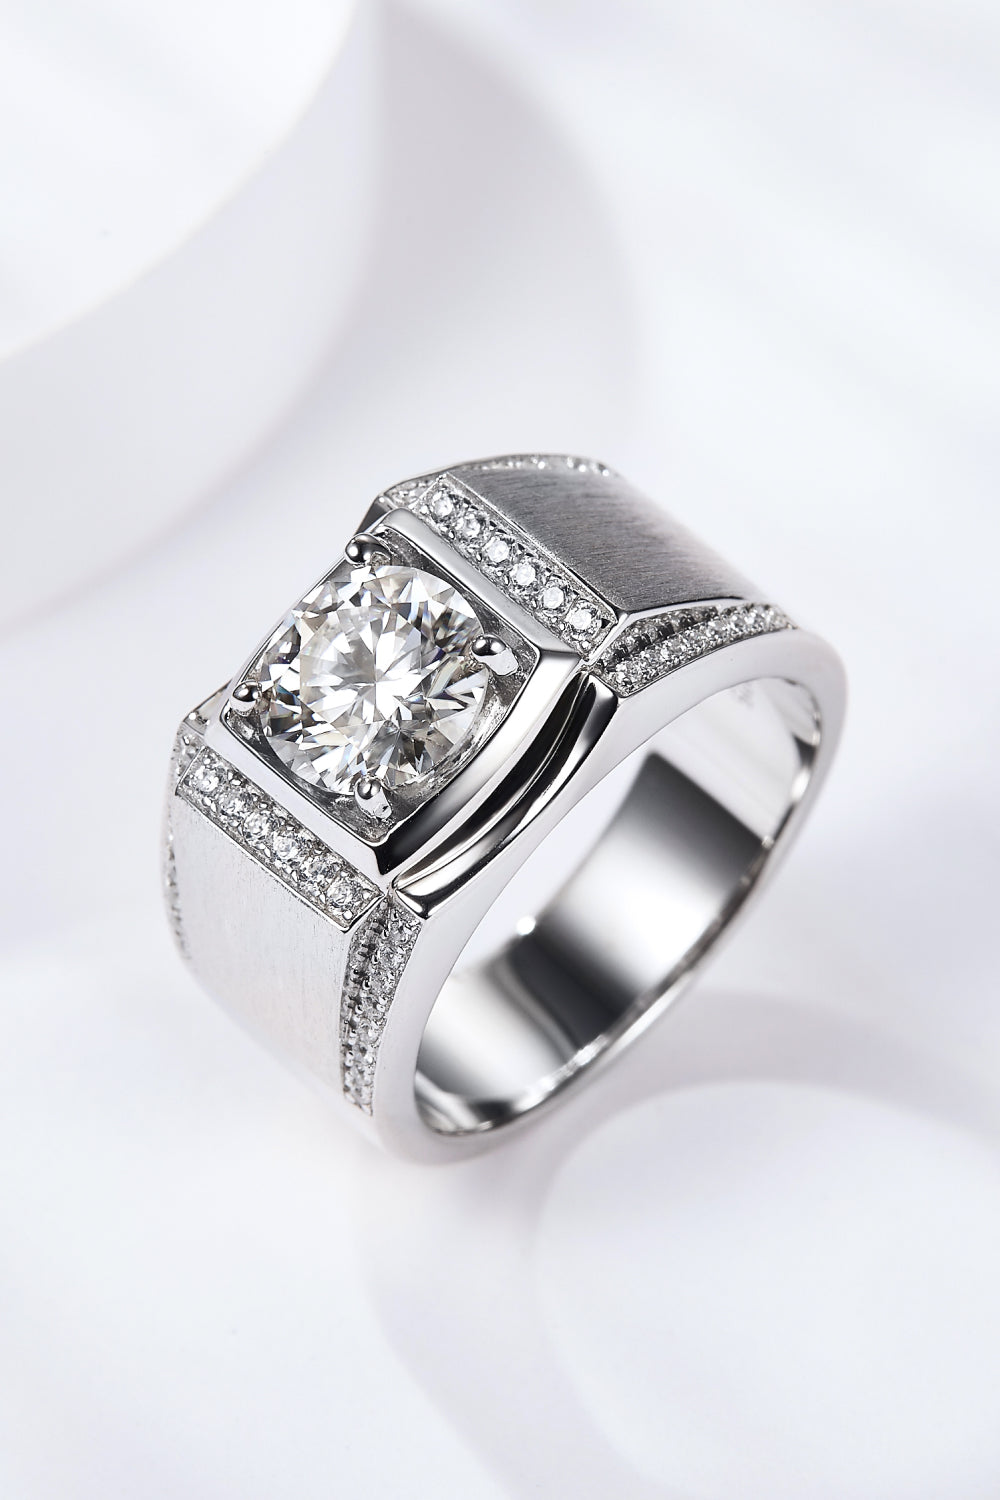 So Charmed 1 Carat Moissanite Ring - Thandynie